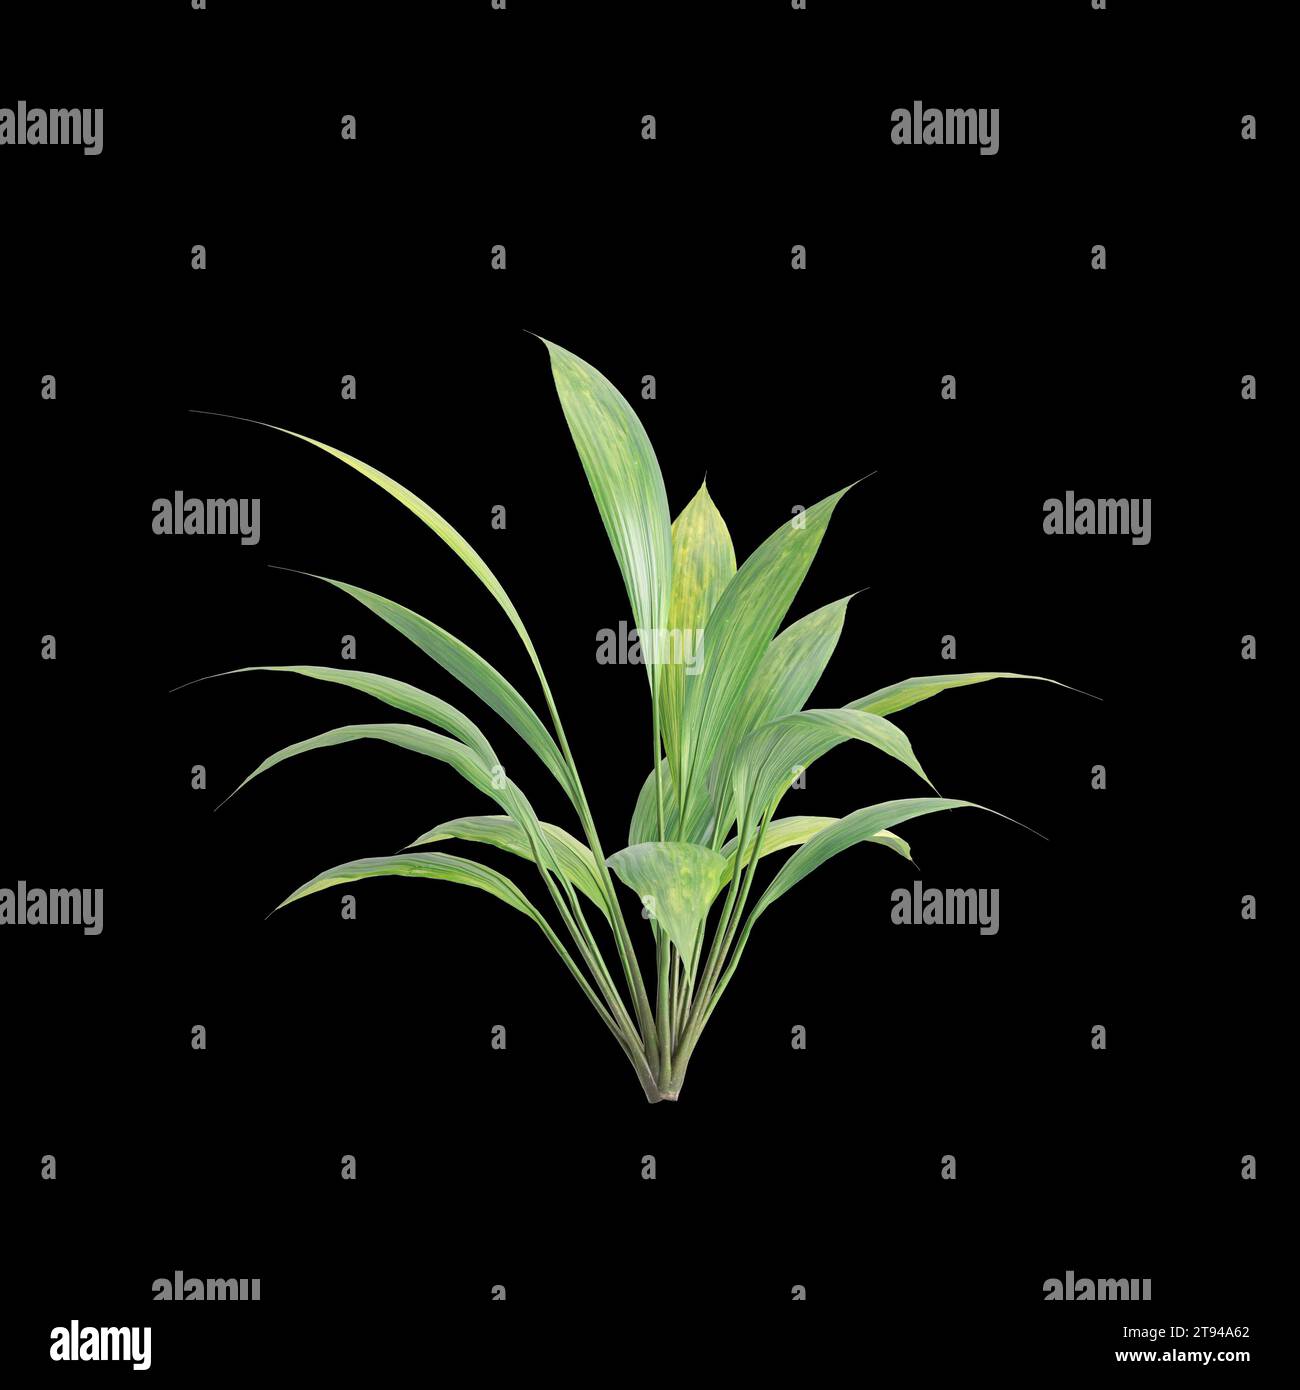 3d illustration of Capitulata Palm Grass isolated on black baclground Stock Photo